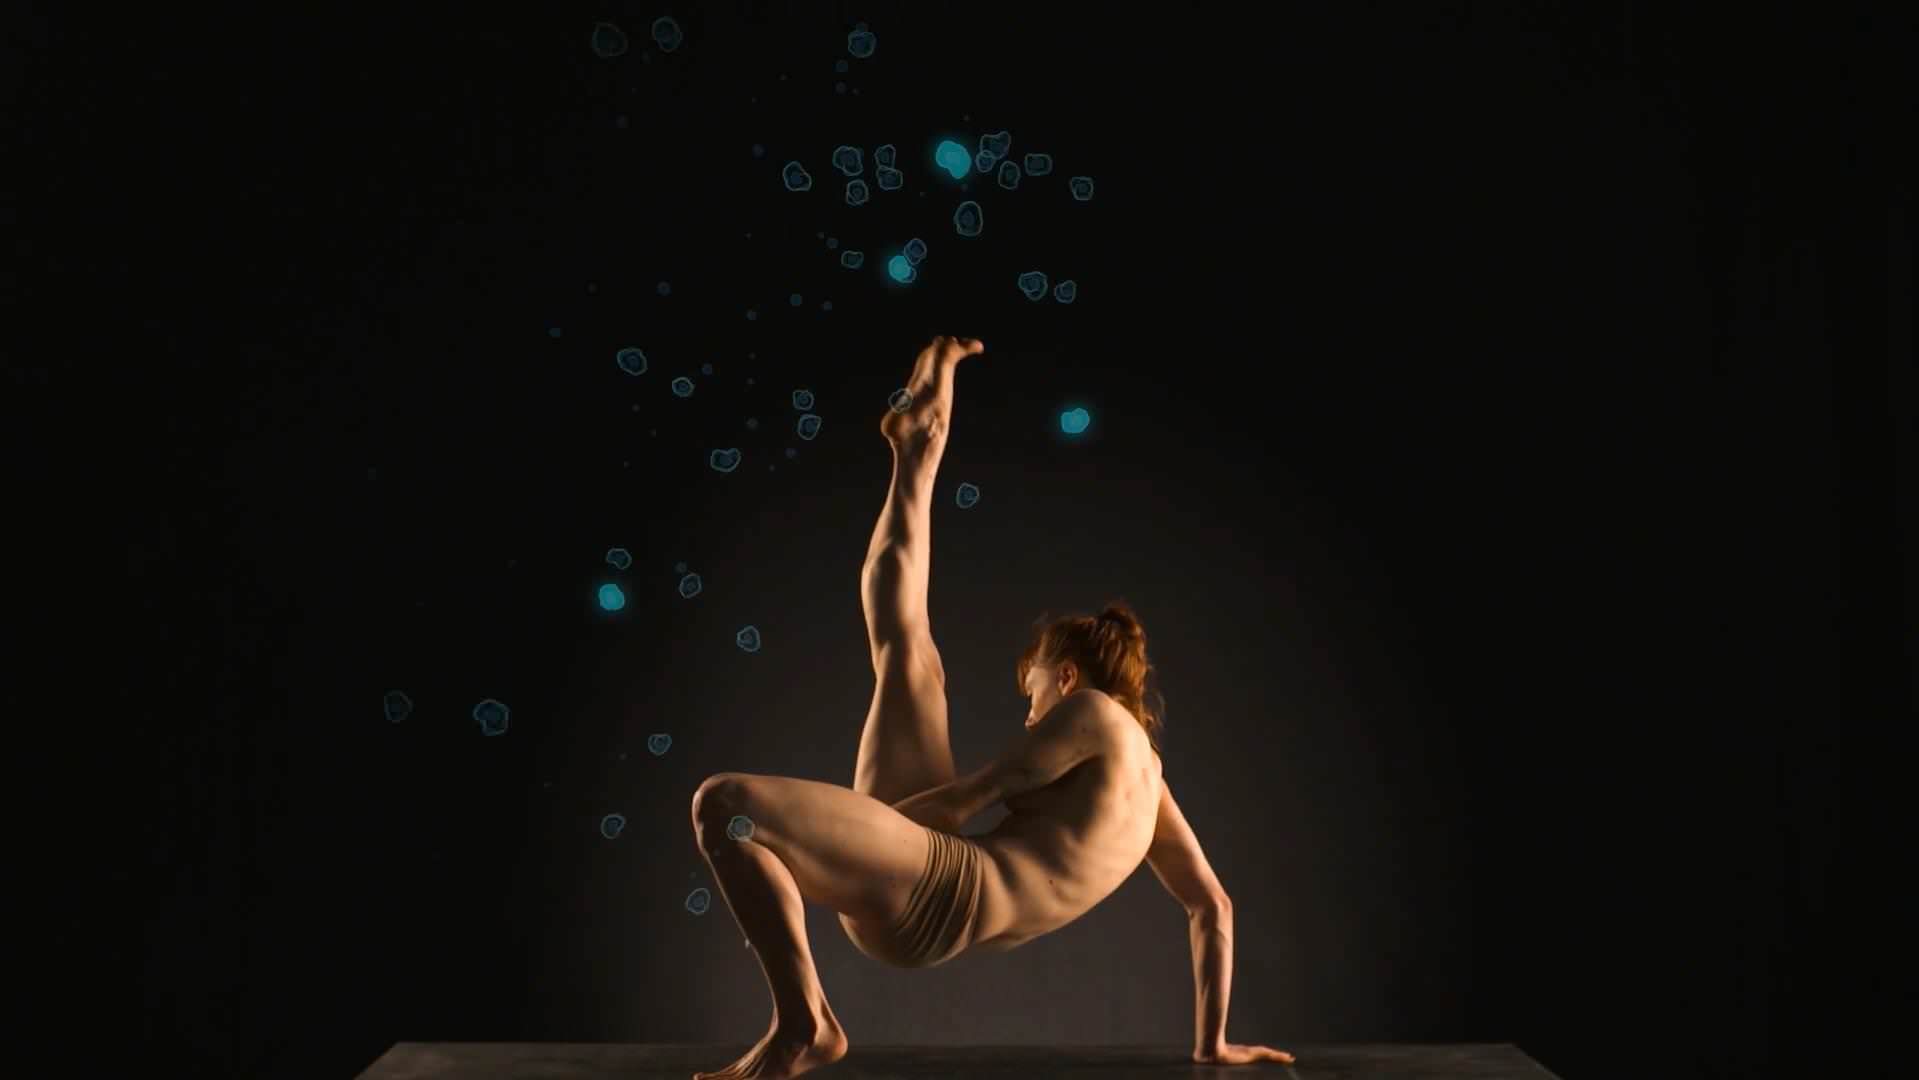 This image shows a dancer lifting her right leg while being surrounded by 3D animated proteins